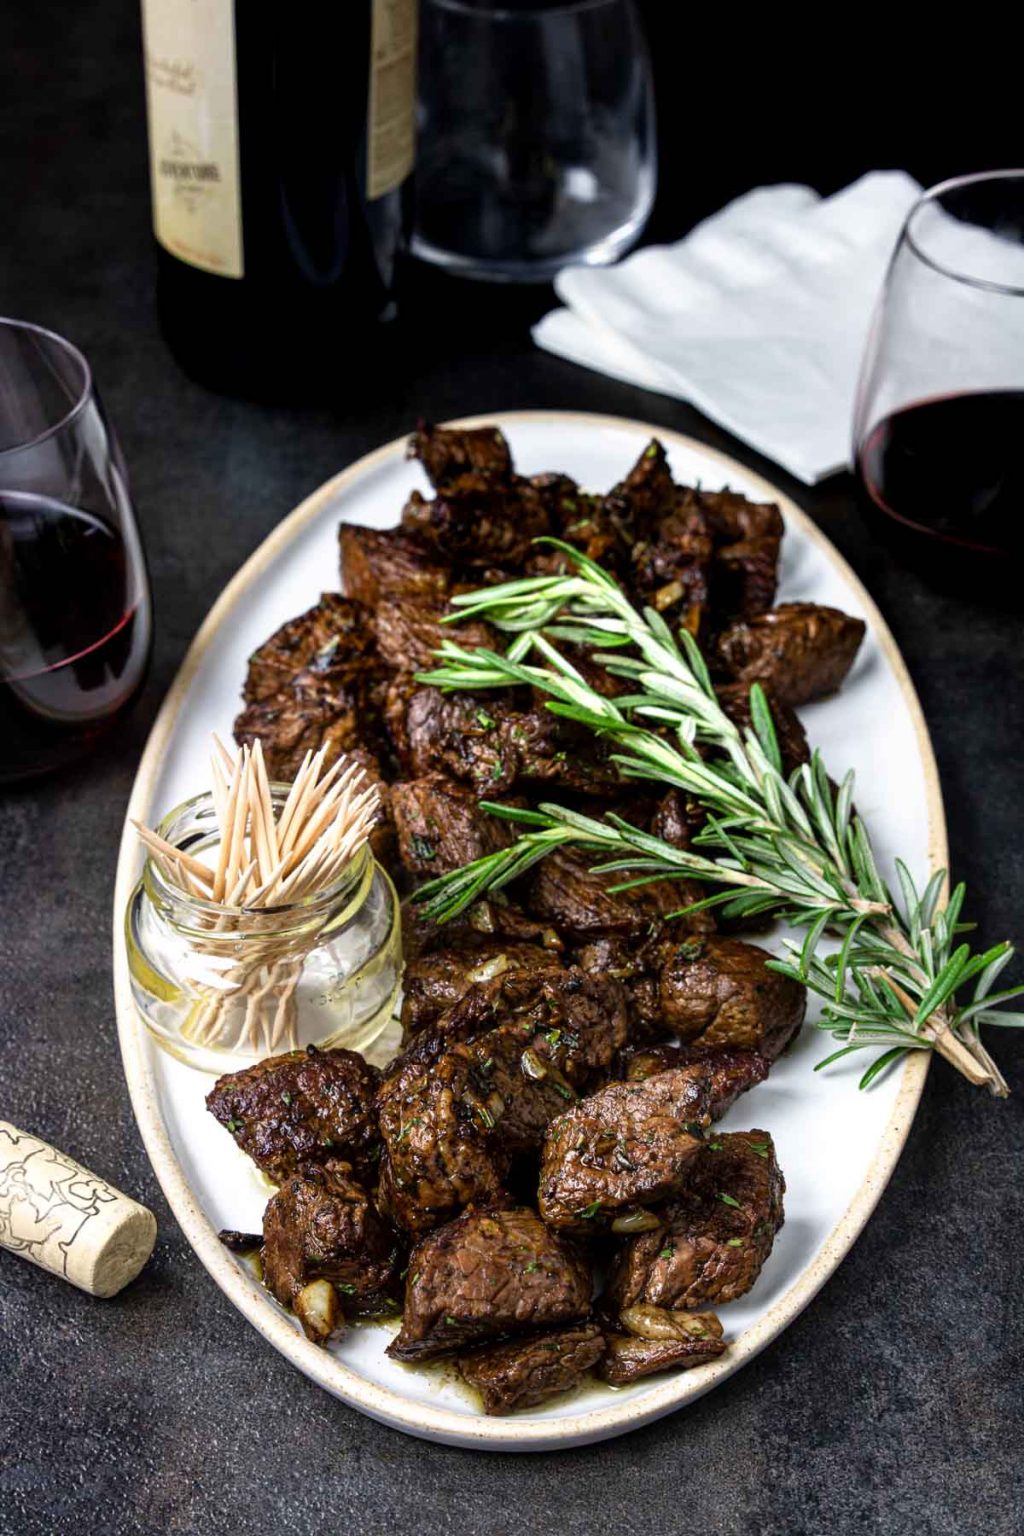 Steak Bites with a garlic butter on a white plate, garnished with rosemary. A cup of toothpicks for serving as an appetizer.